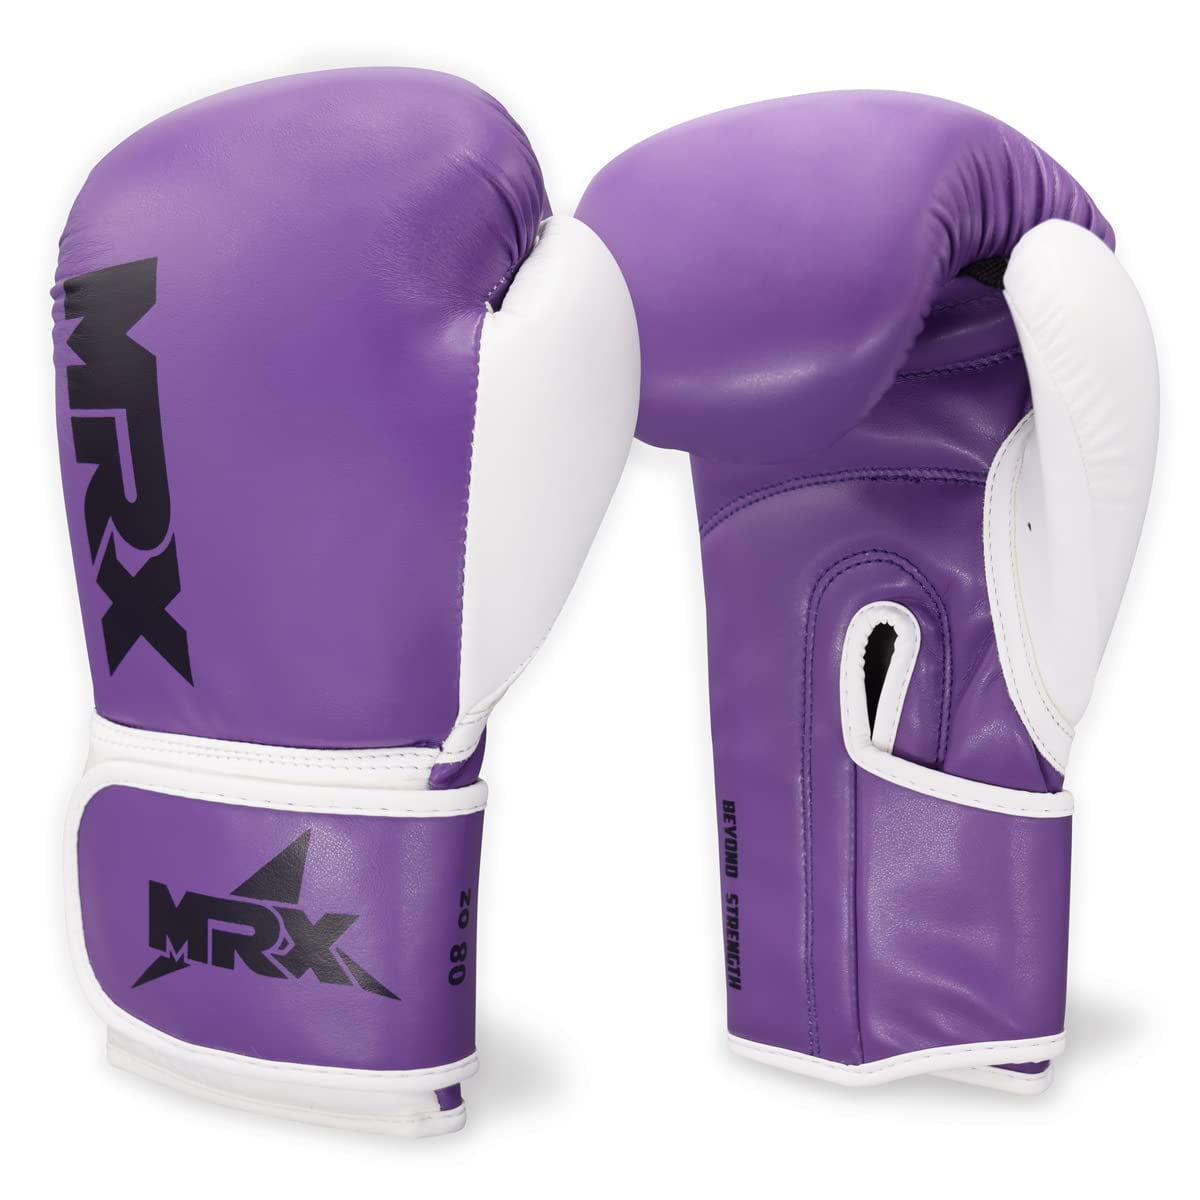 Core Boxing Gloves with Free Hand wrap Adult Sparring Training Boxing Gloves Pro Punching Heavy Bags mitt UFC MMA Muay Thai for Men & Women Fight Boxing Gloves and Kickboxing 